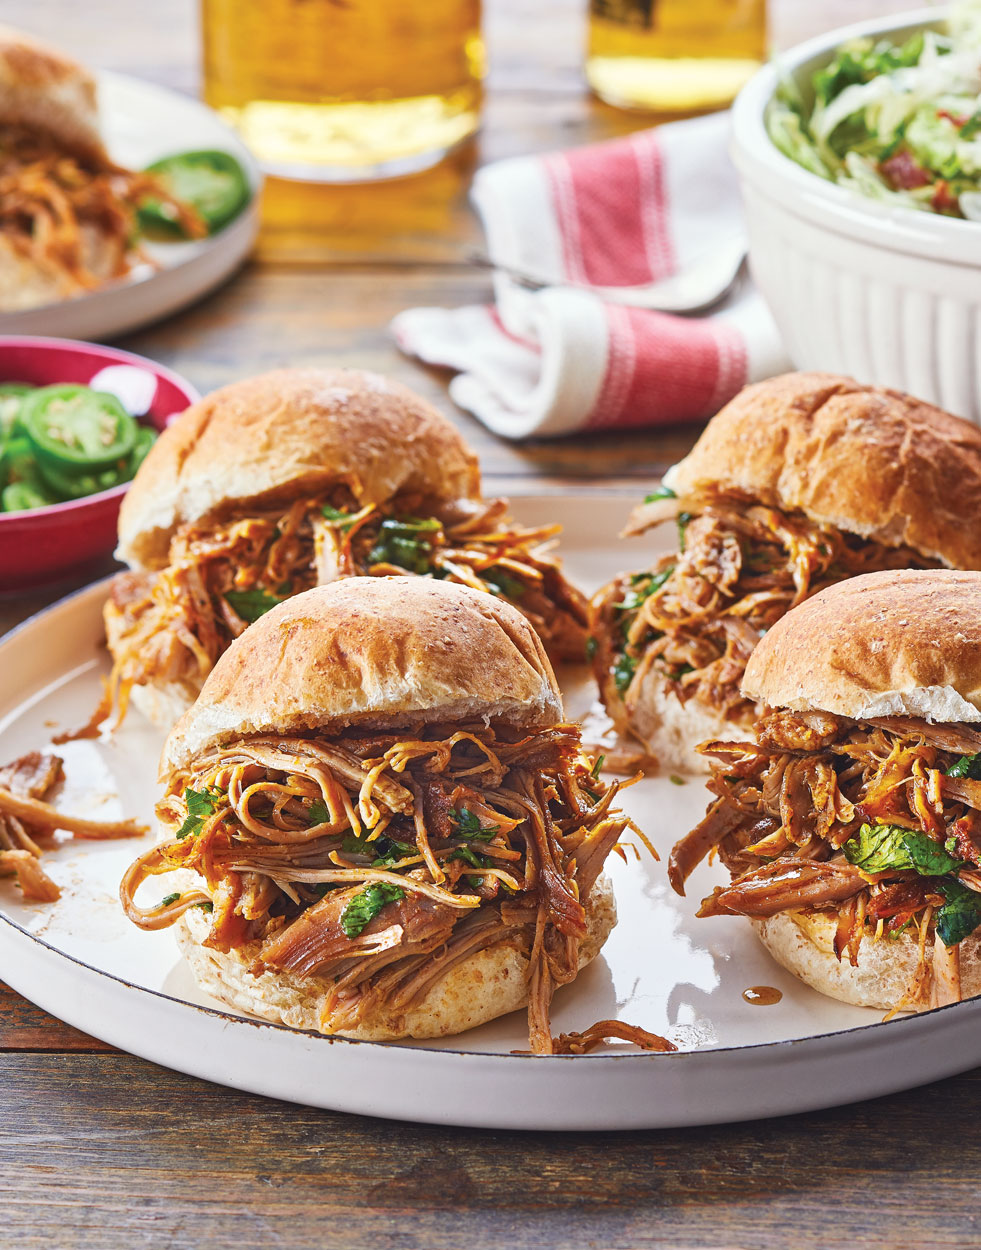 Spicy Pulled Pork Recipe